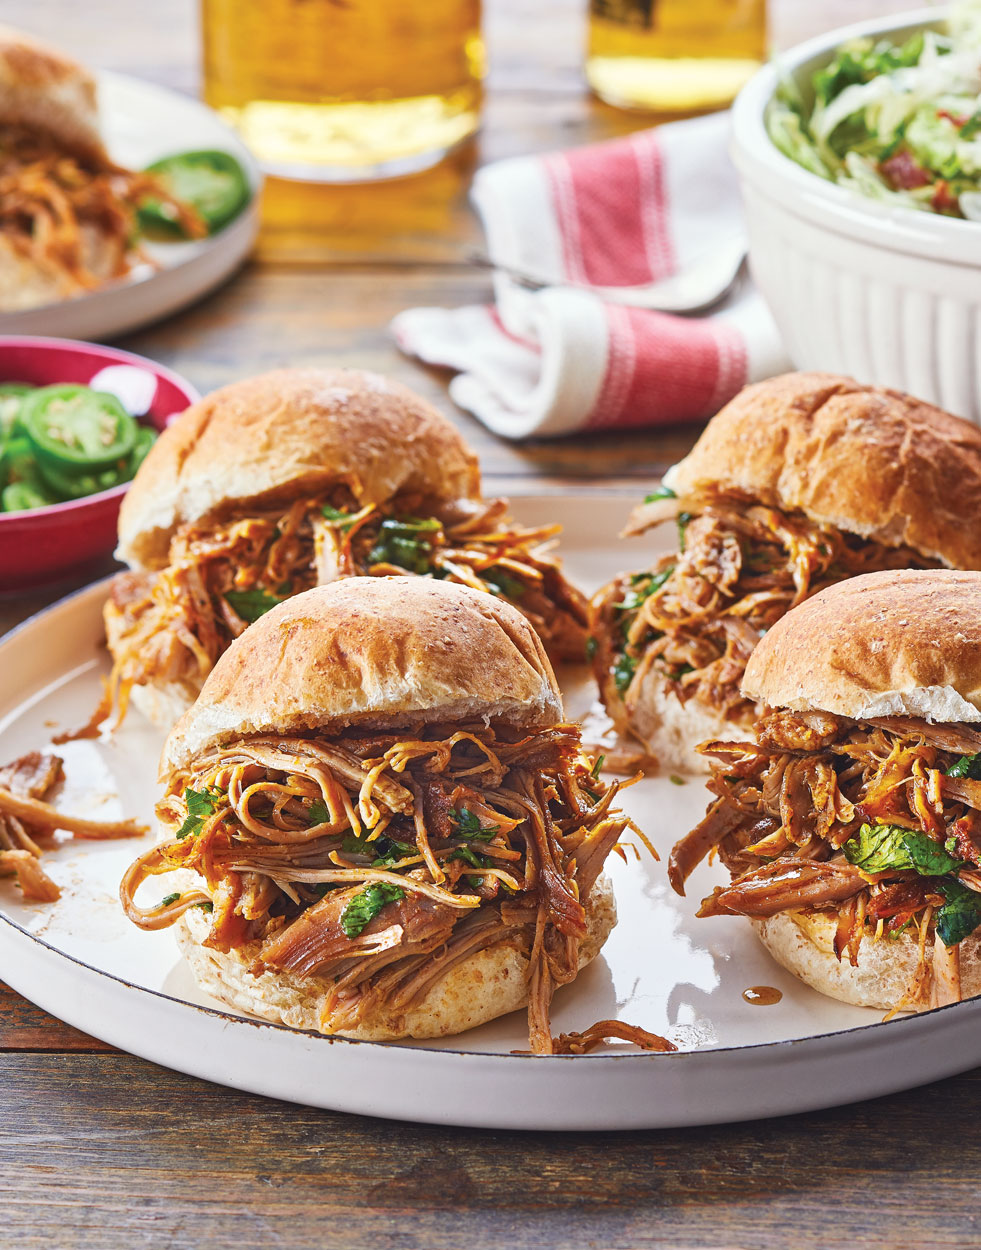 Spicy Pulled Pork Recipe